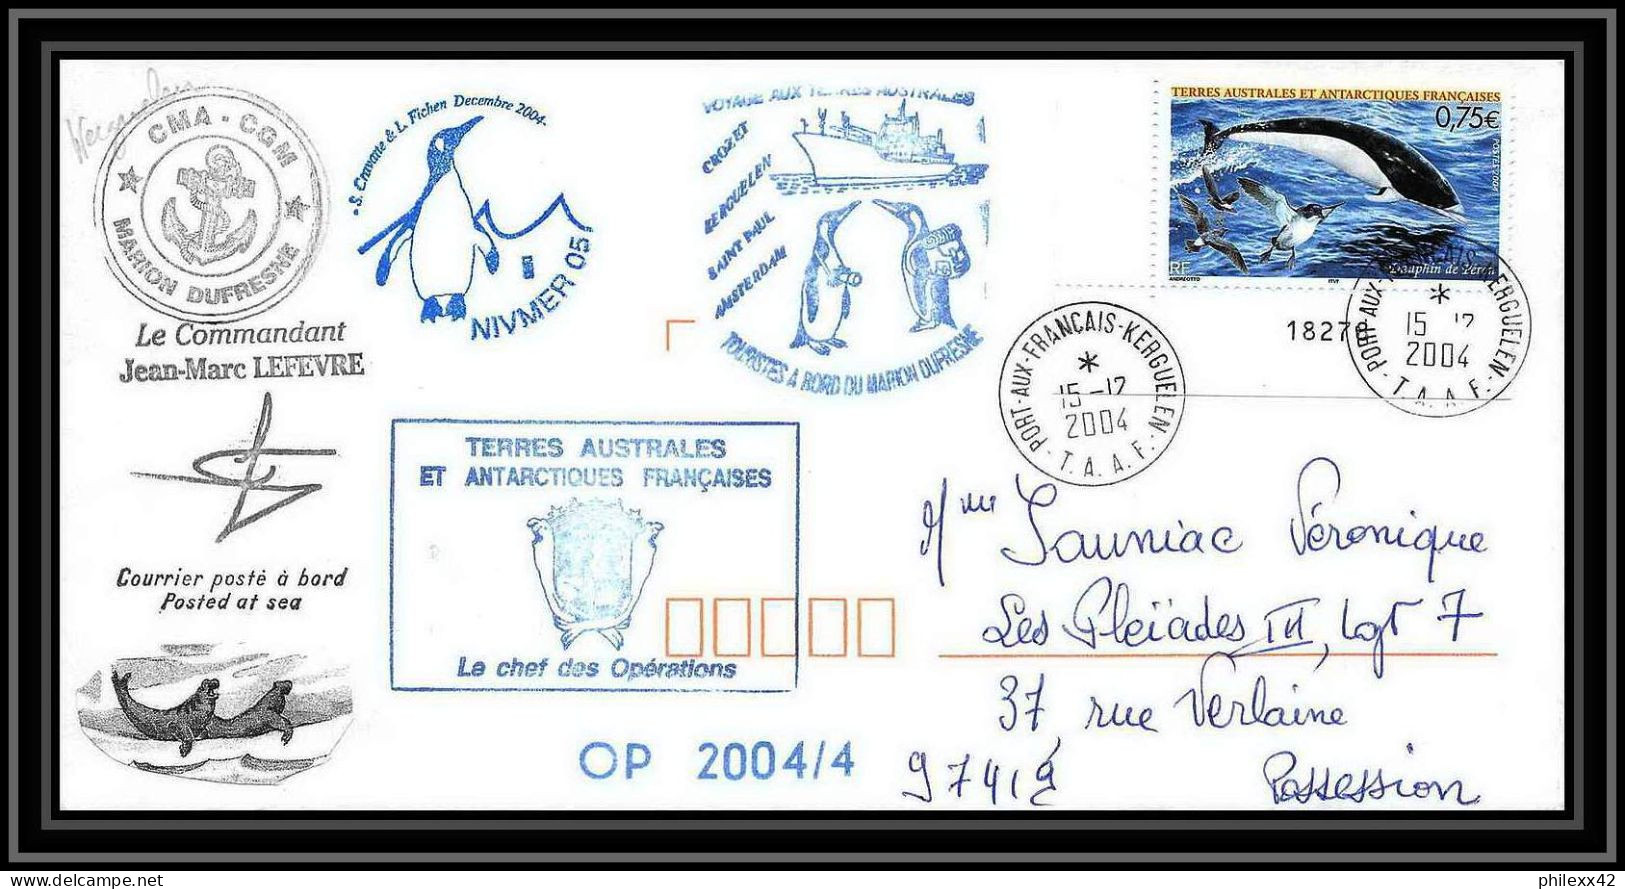 2477 ANTARCTIC Terres Australes TAAF Lettre Cover Dufresne 2 Signé Signed OP 2004/4 N°385 Possession Reunion Dauphin - Antarctische Expedities